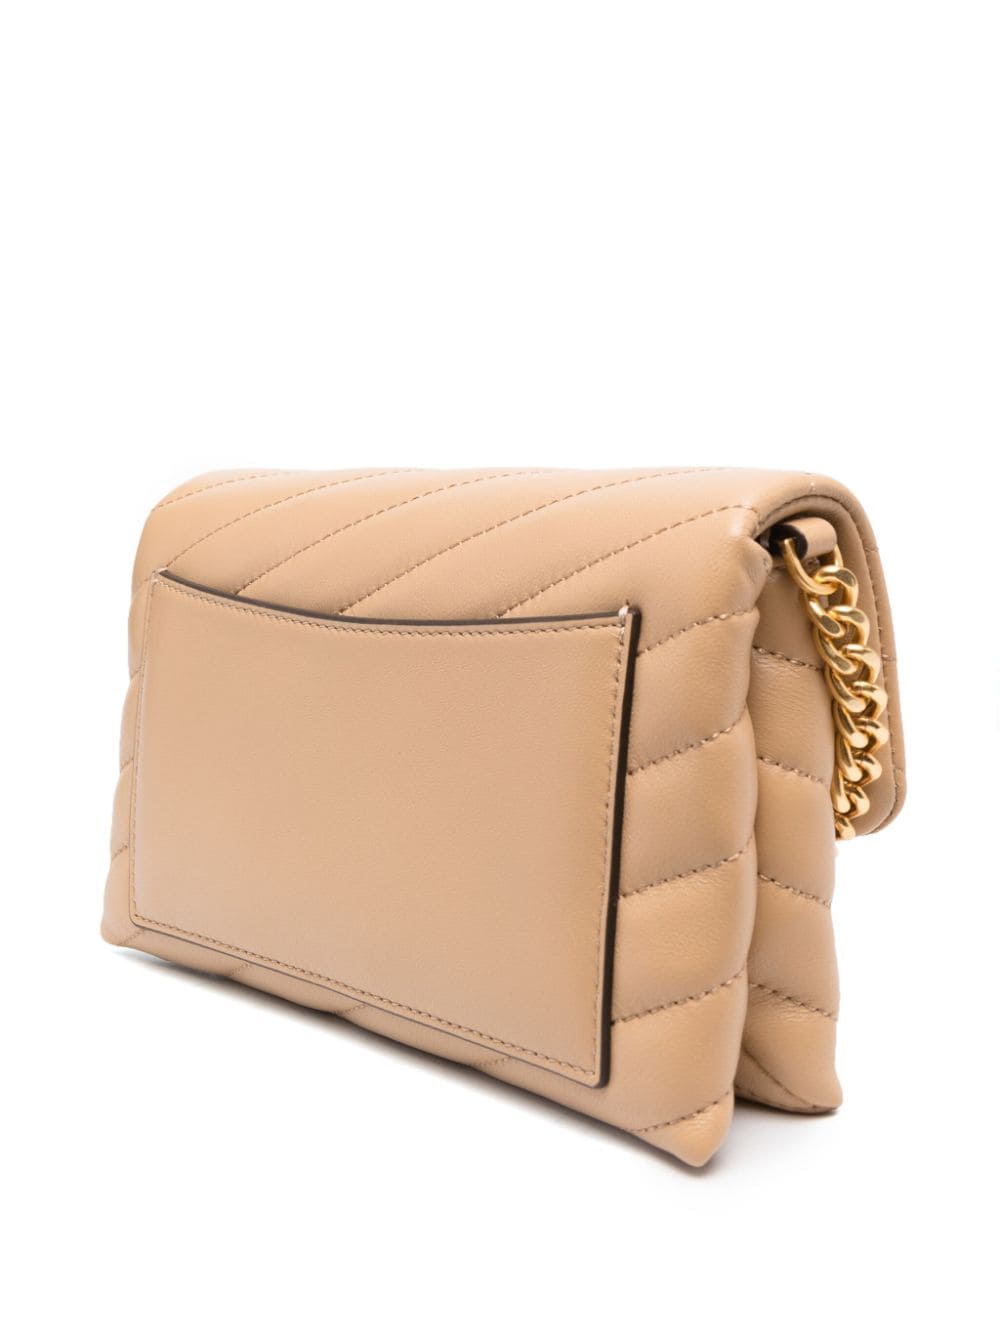 Kira quilted leather crossbody bag<BR/><BR/><BR/>